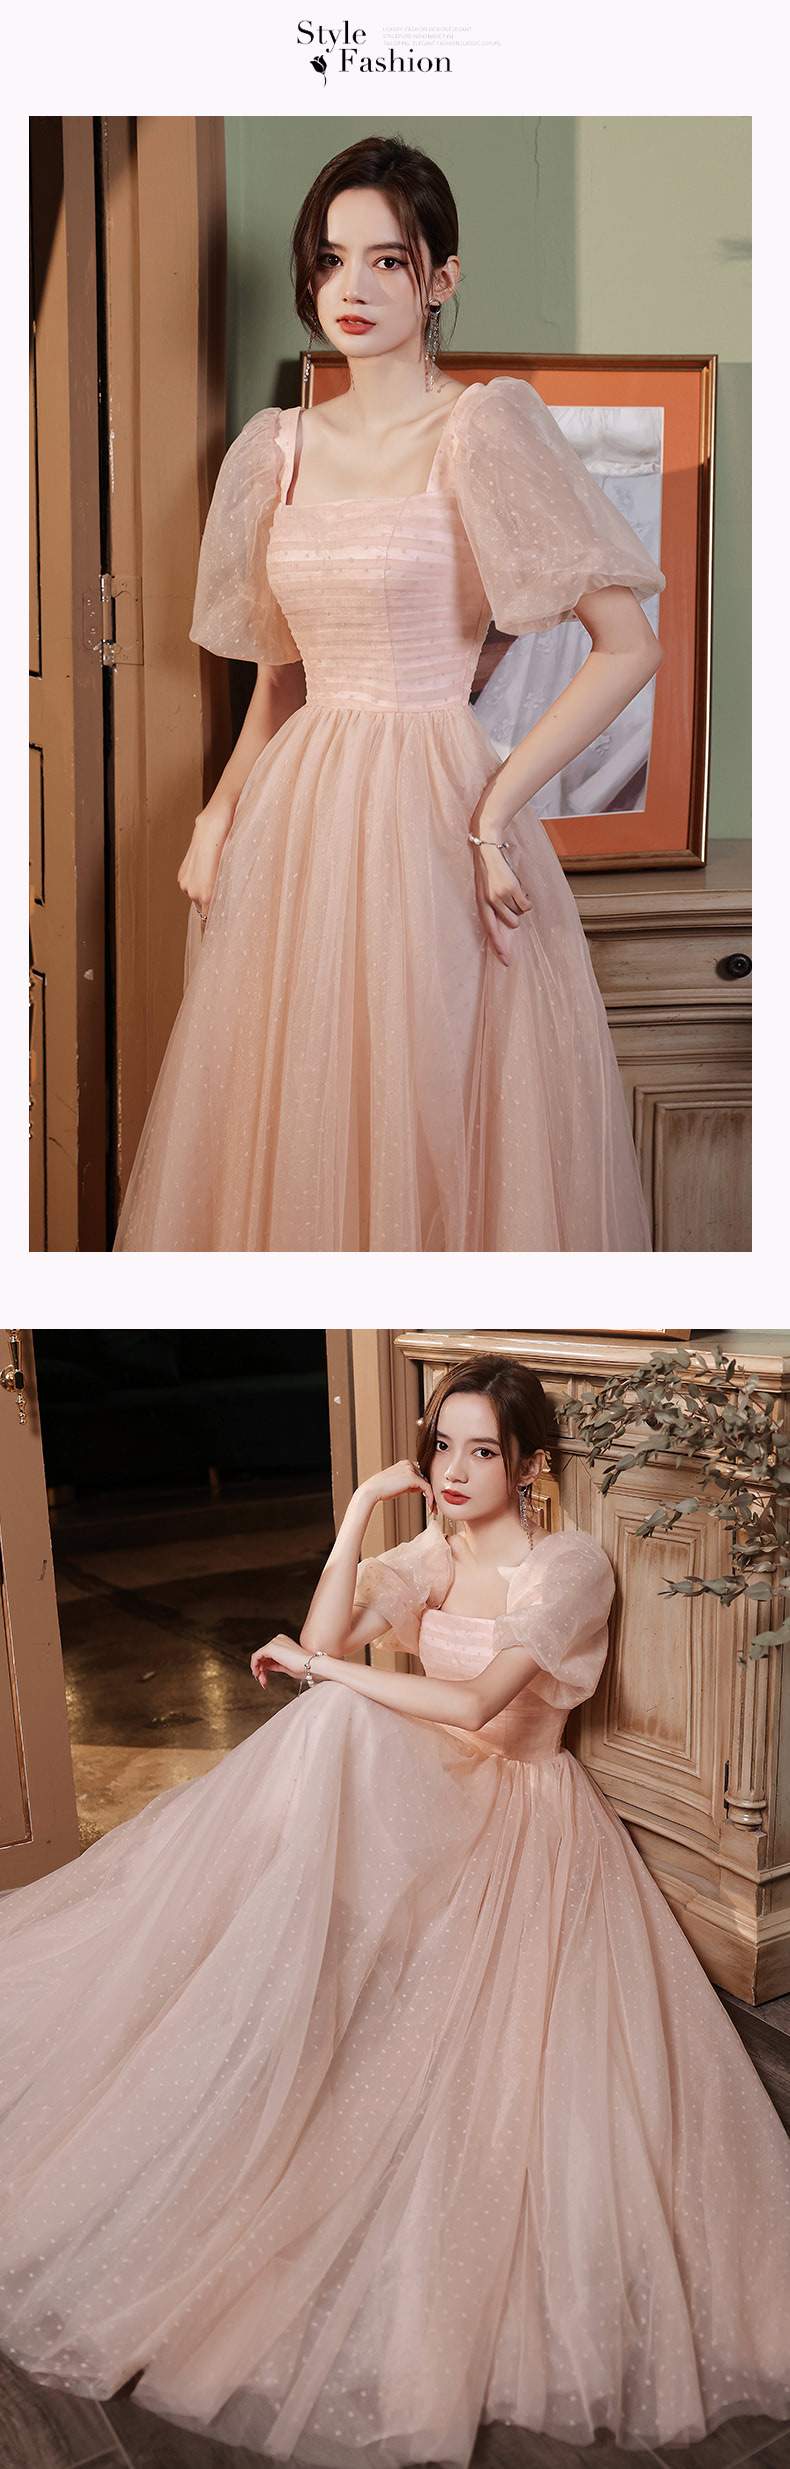 Fairy-Princess-Stylish-Pink-Tulle-Prom-Evening-Party-Dress15.jpg